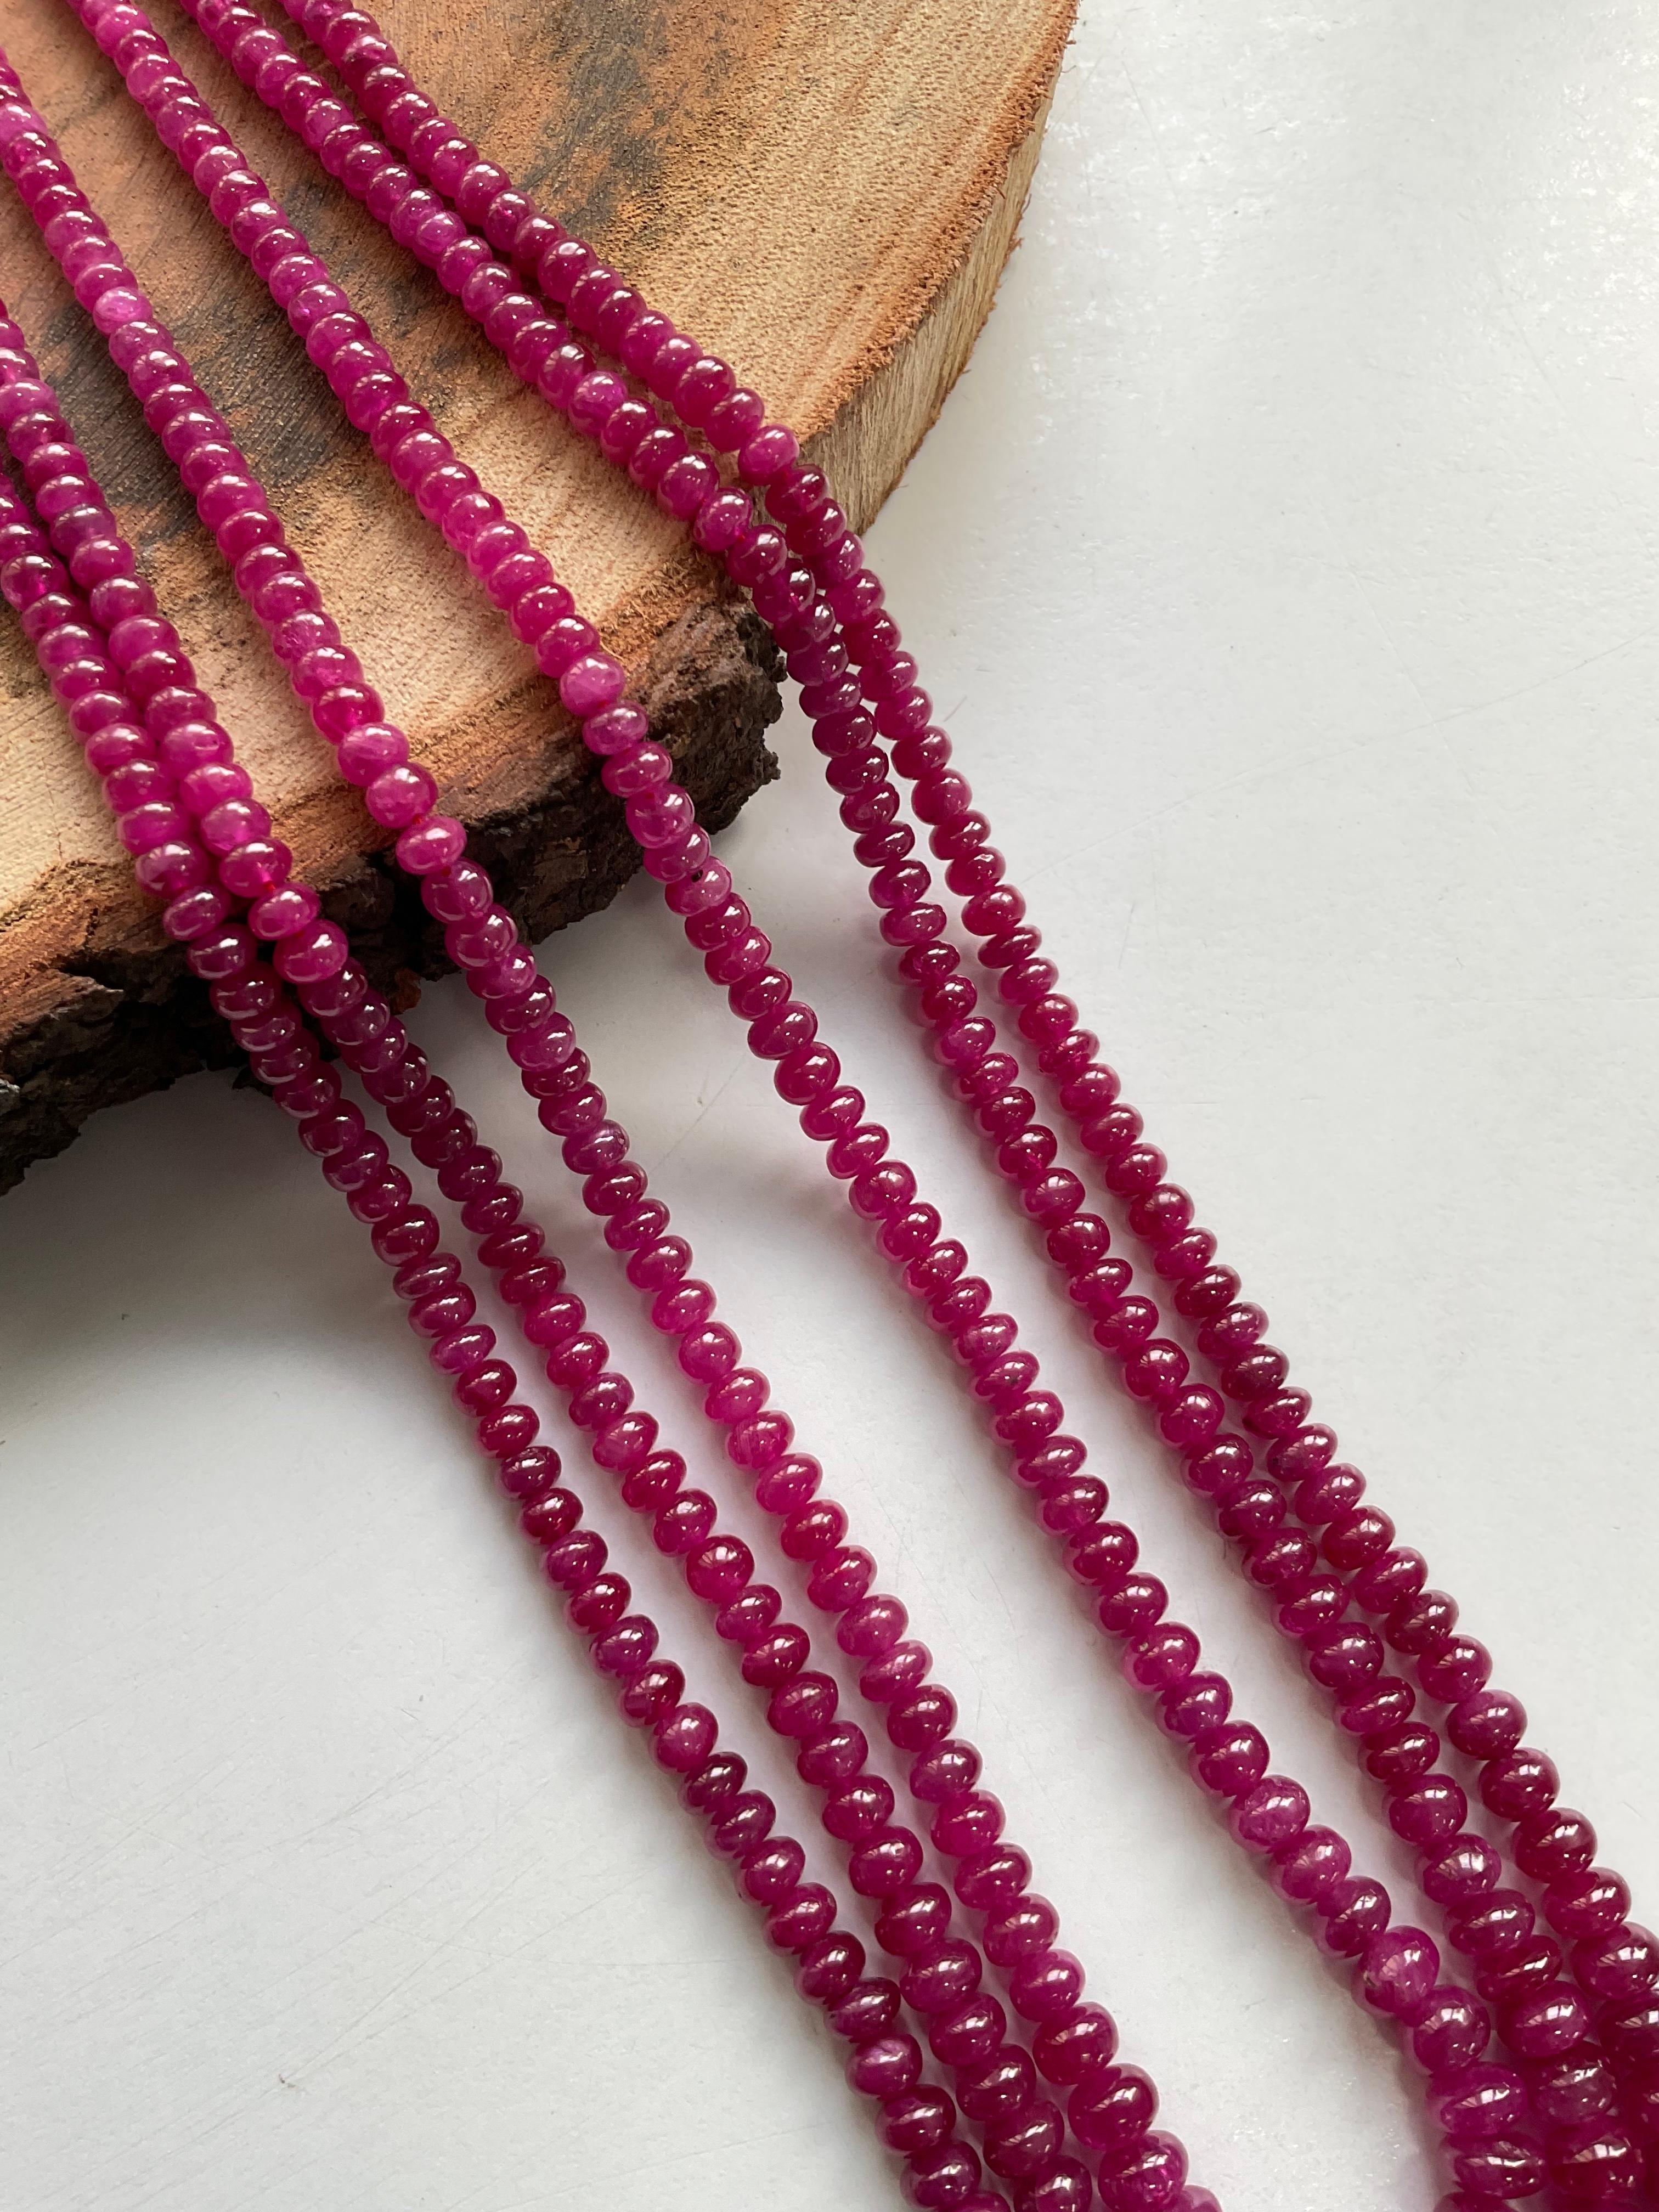 Burma Ruby Beaded Jewelry Necklace Rondelle Beads Gem quality
Size : 3 To 8 MM 
Weight : 401.35 Carats
Line : 3

